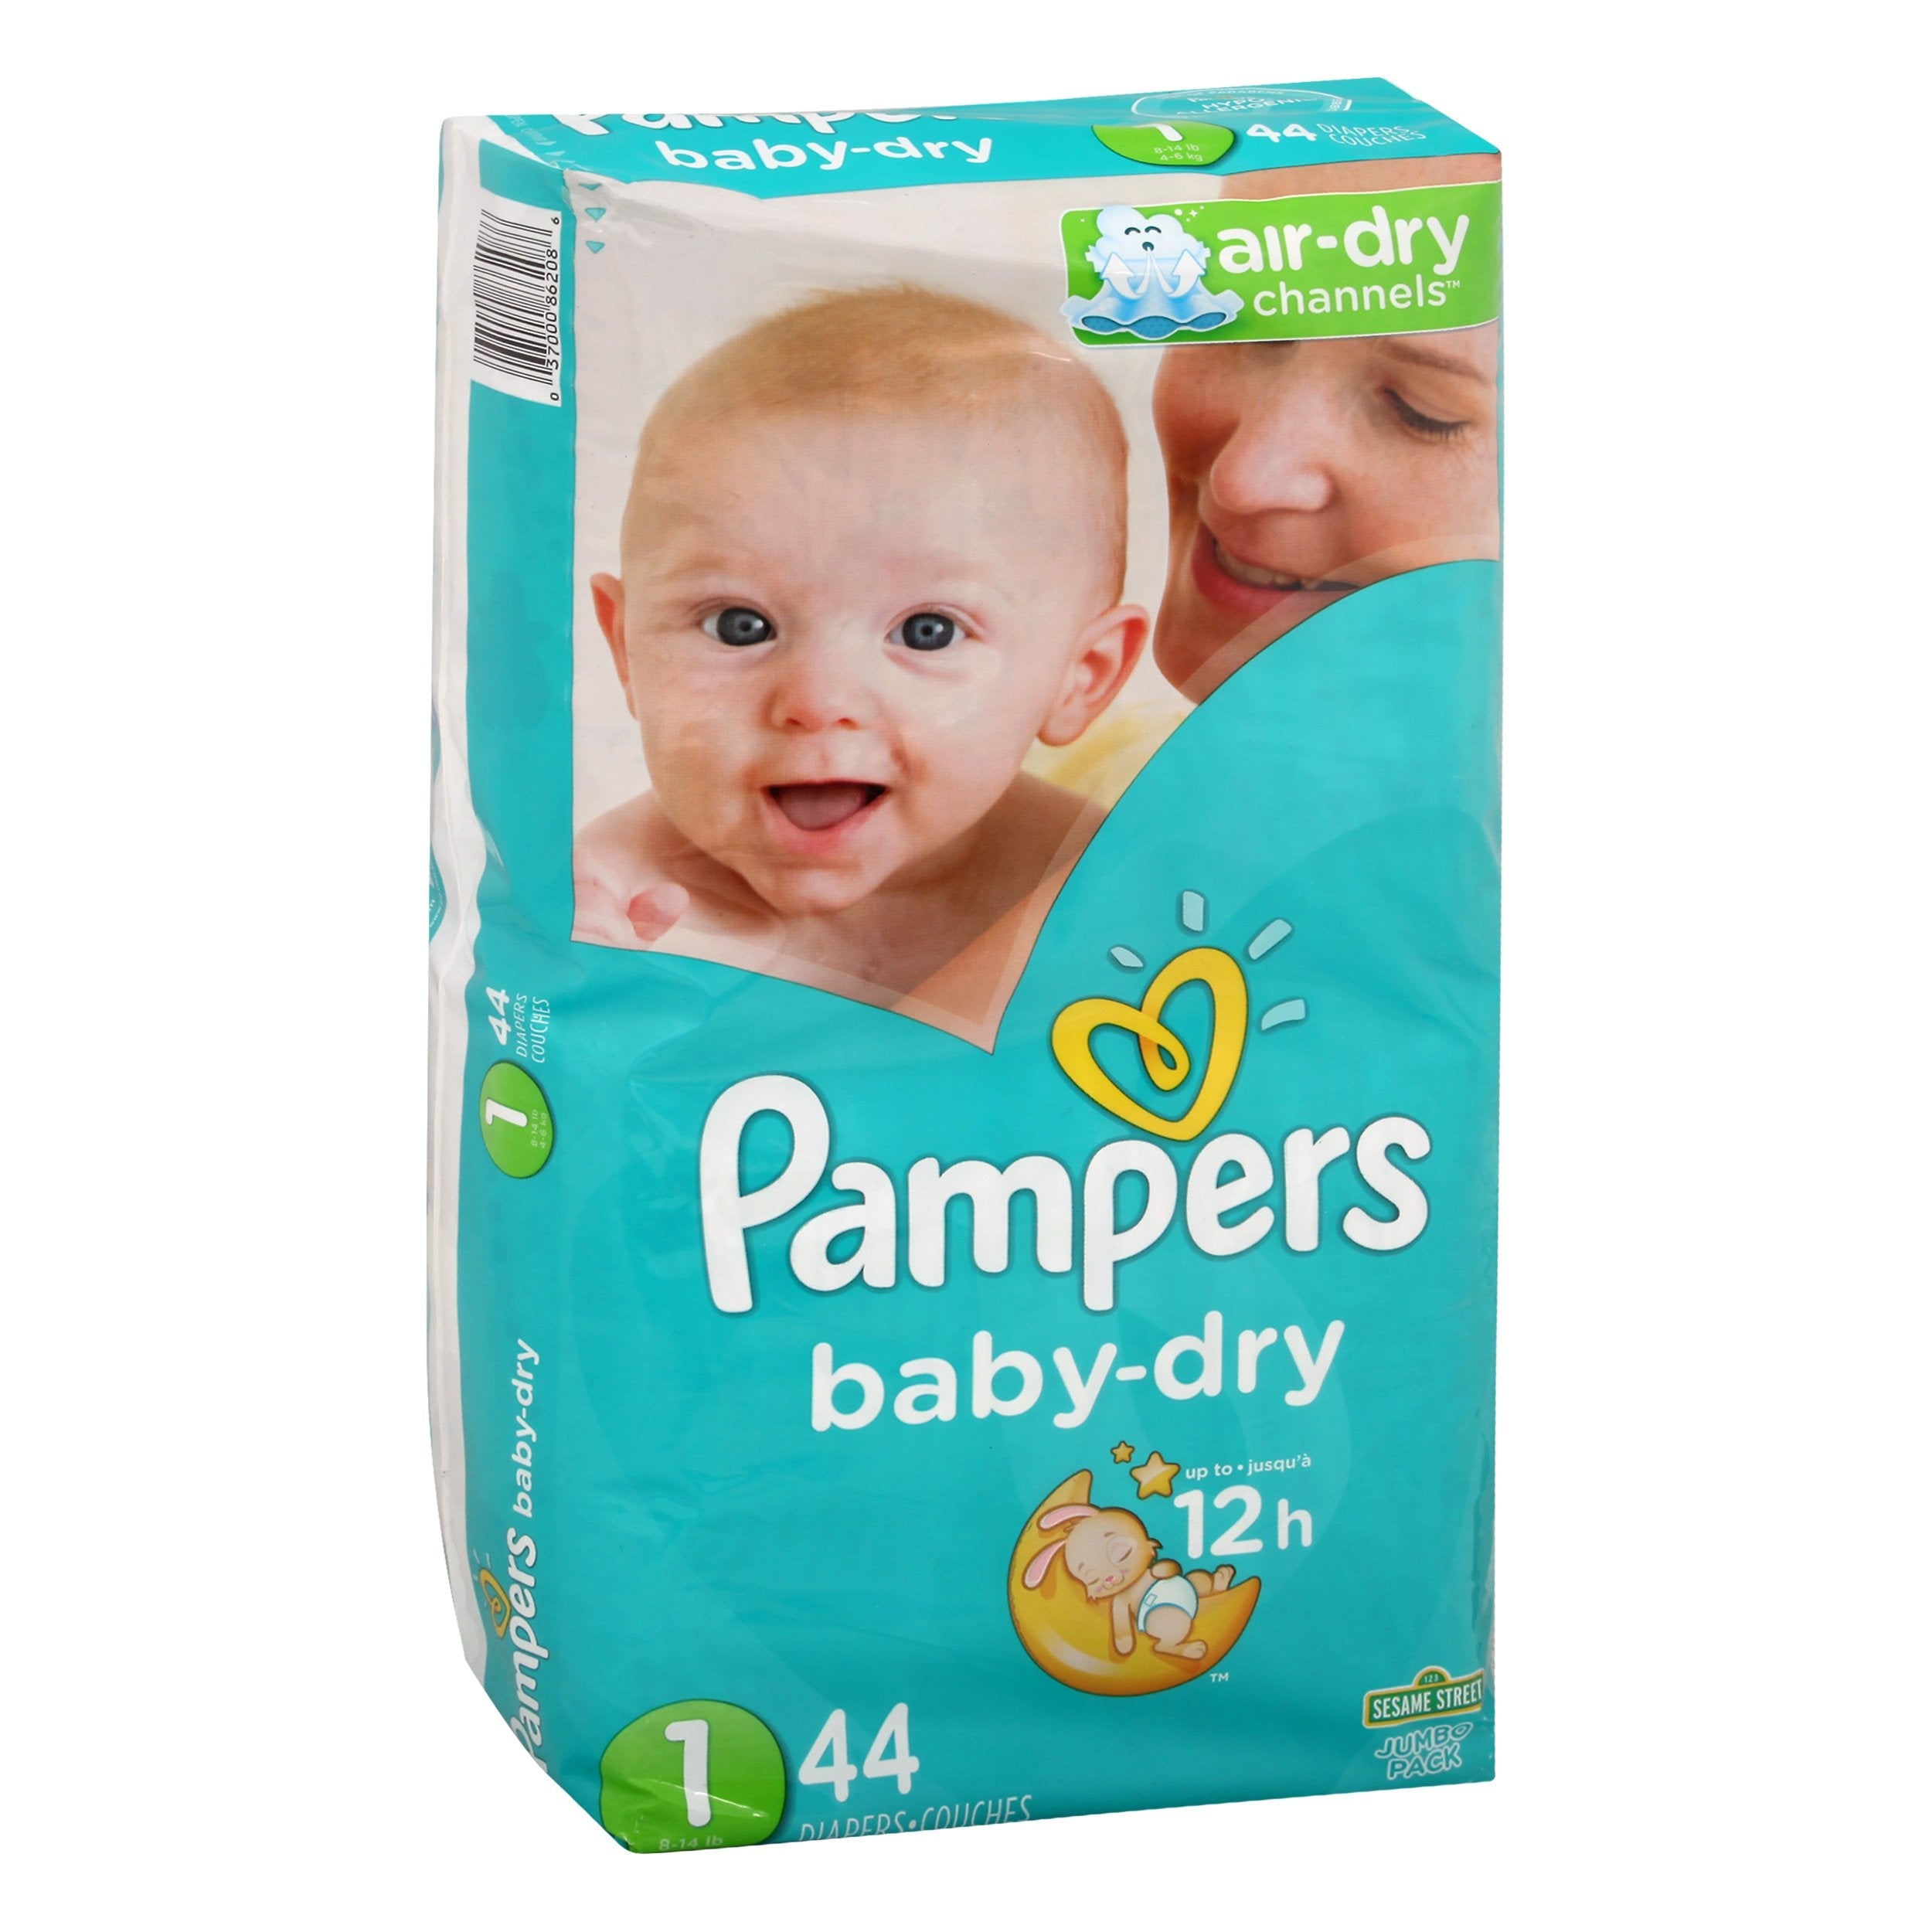 Geurloos zweer Meander Pampers Baby Dry Size 1 Jumbo Diapers - 44 CT 2 Pack – StockUpExpress